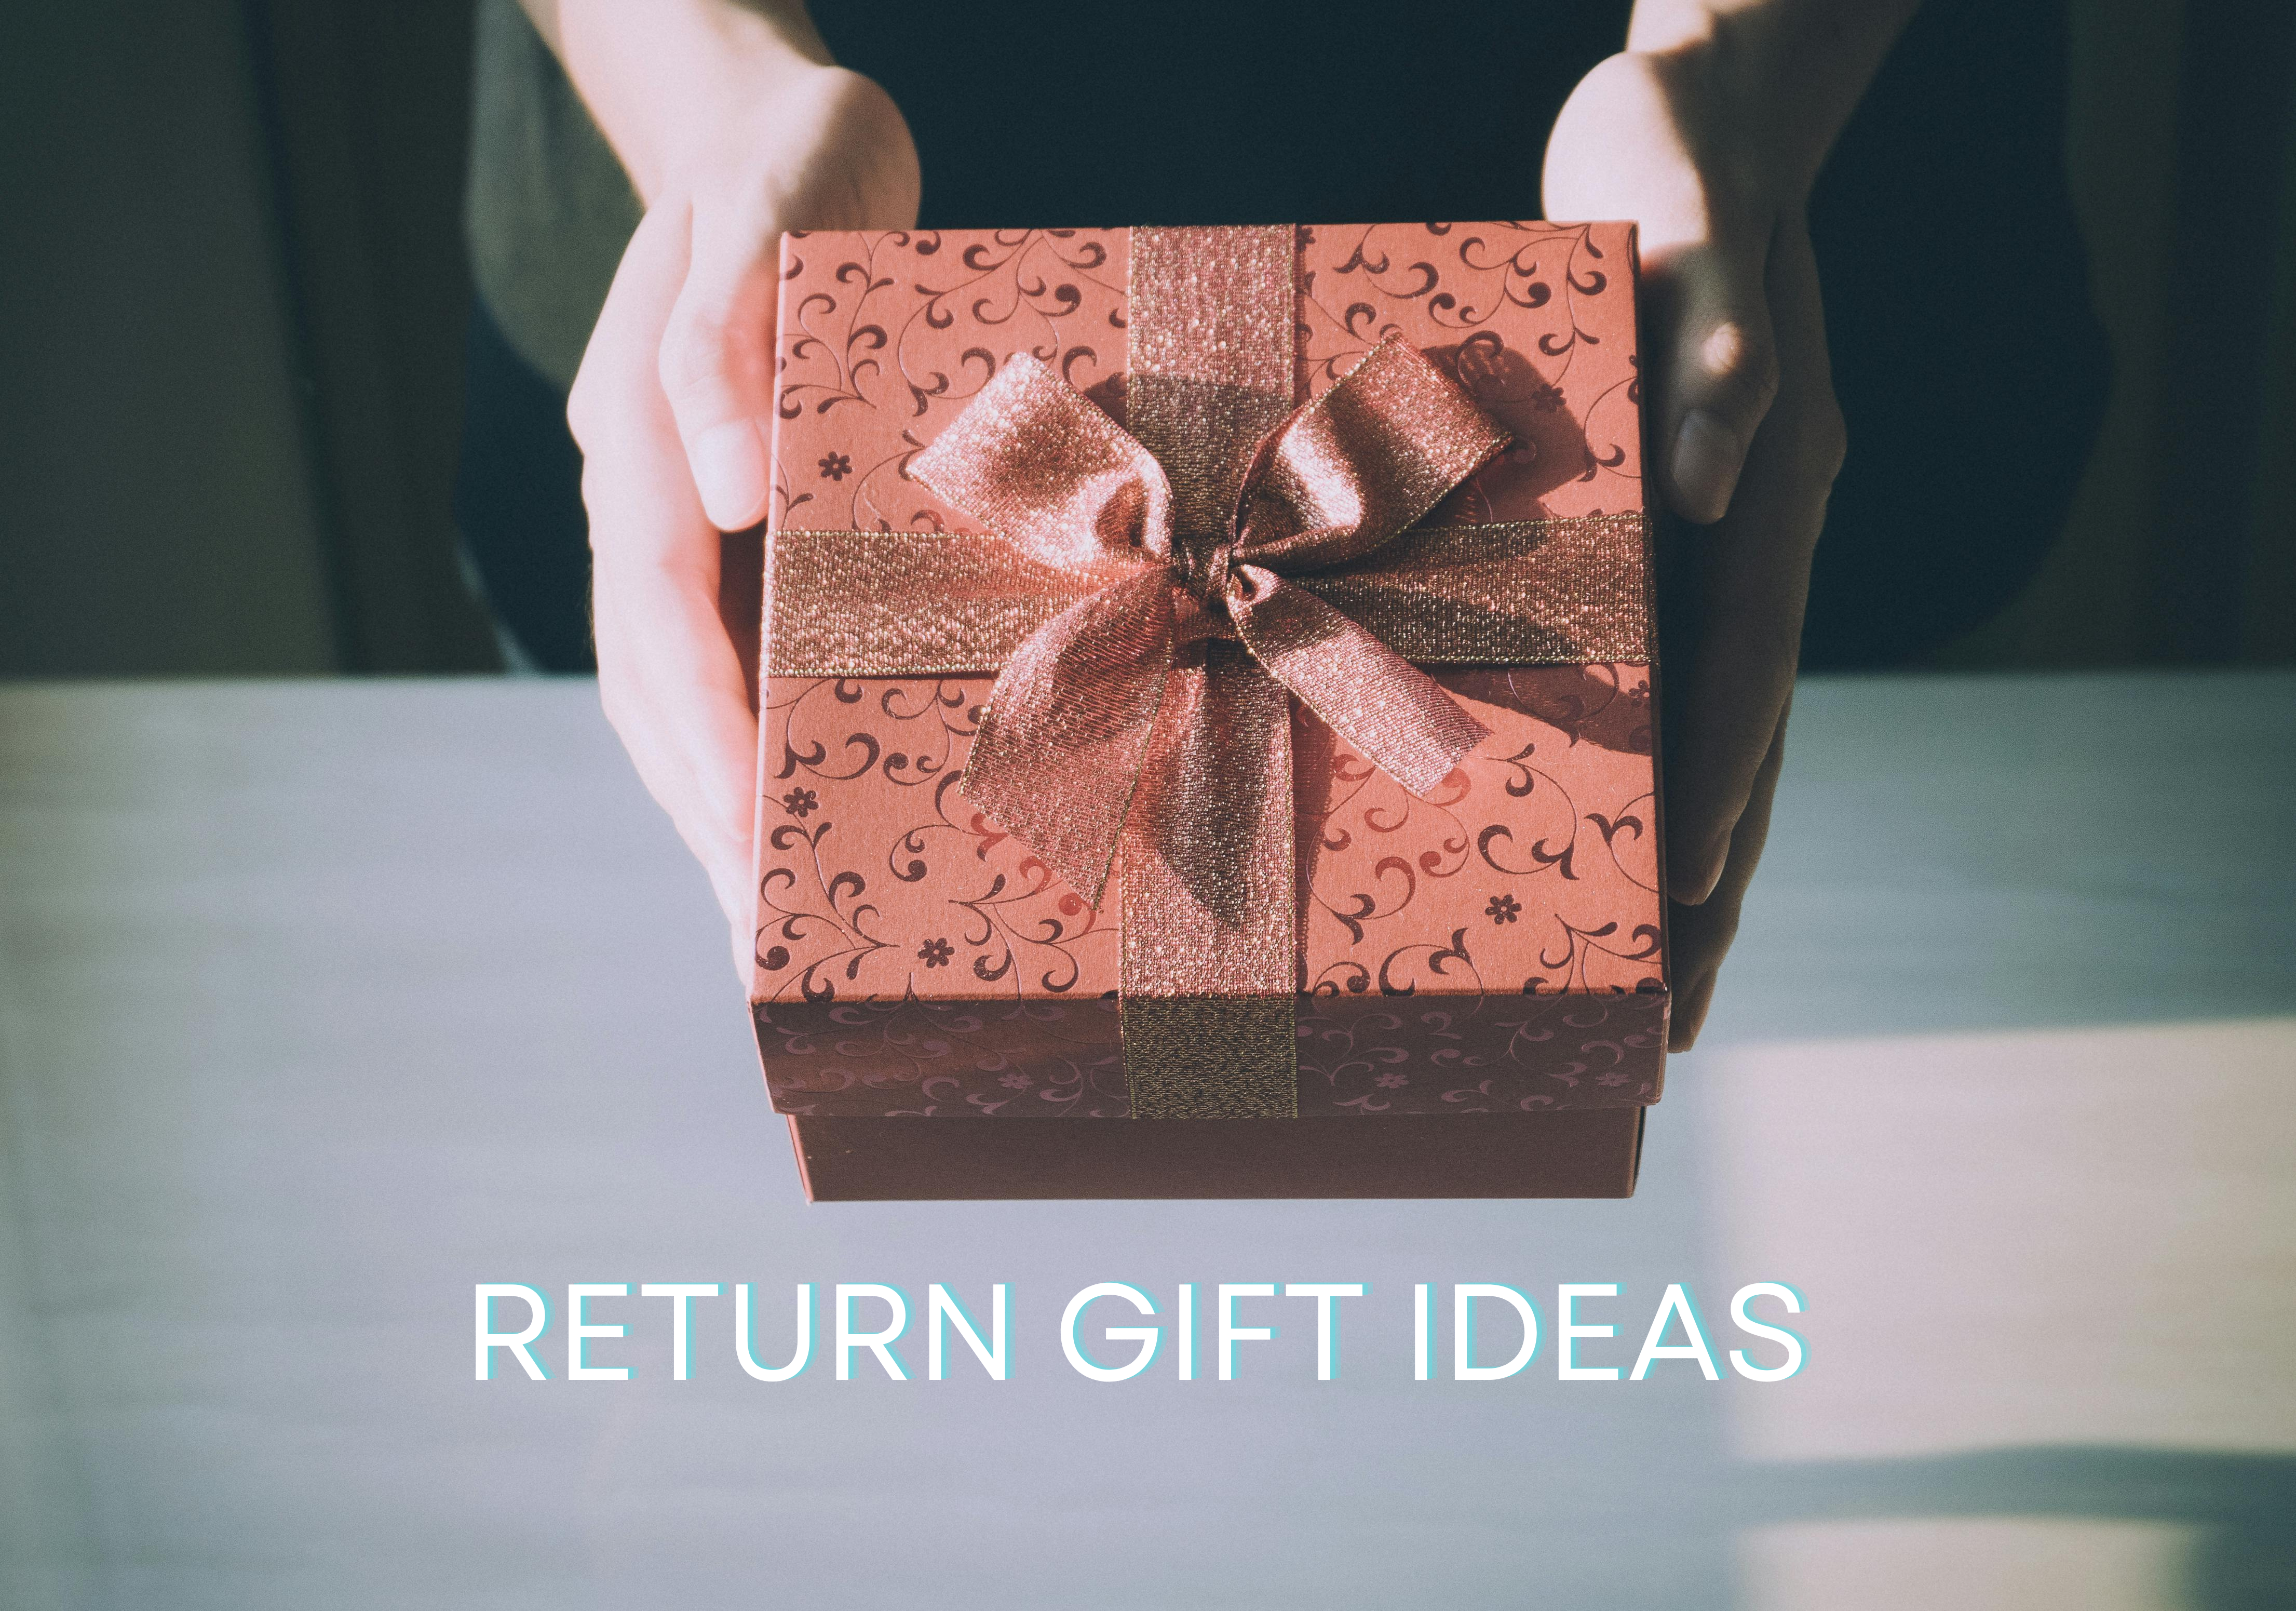 Unique Return Gifts to Make Your Event Memorable